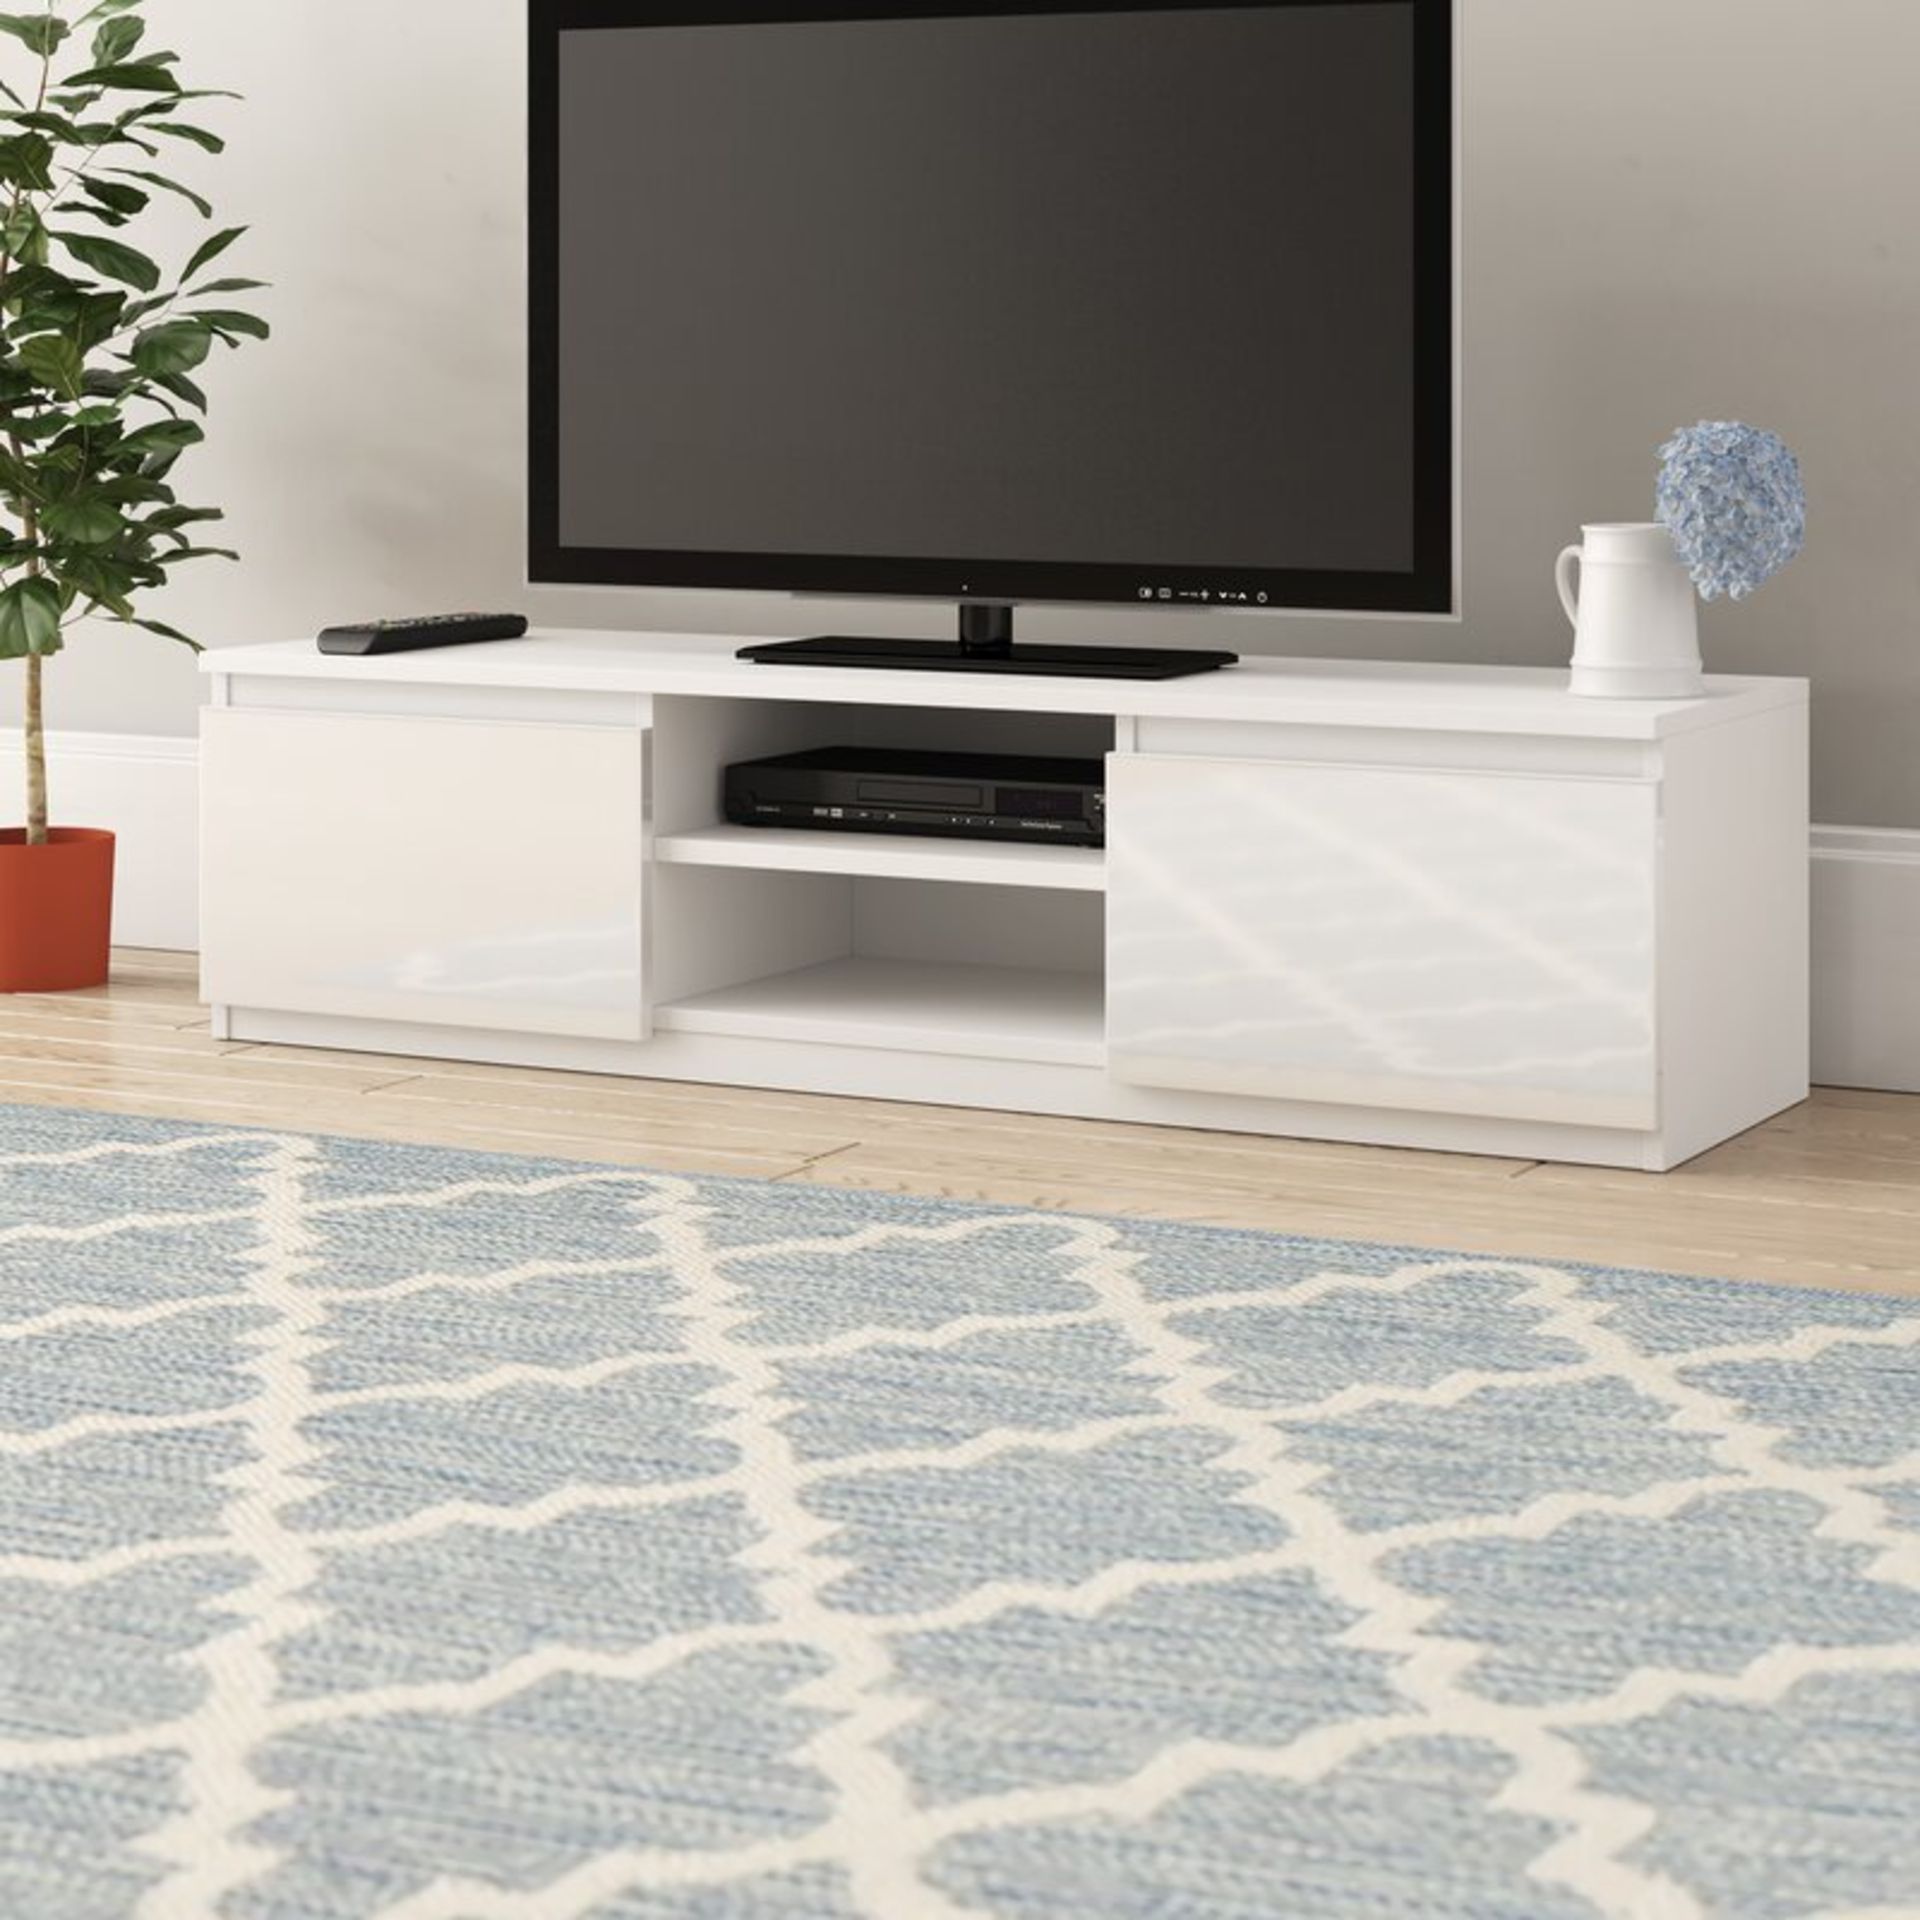 Ordonez TV Stand for TVs up to 58" White - RRP £173.99 - Image 2 of 2